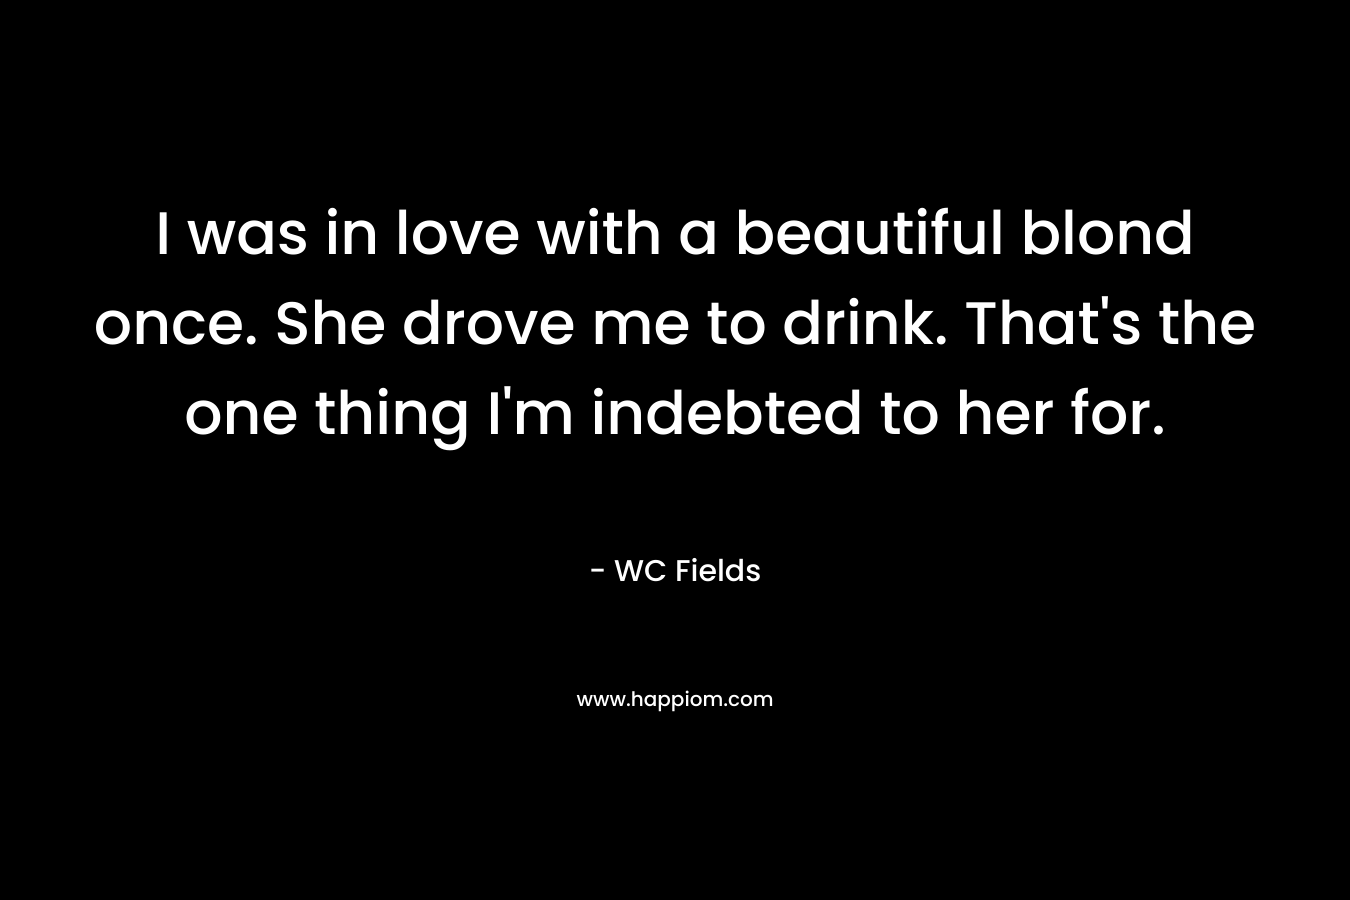 I was in love with a beautiful blond once. She drove me to drink. That’s the one thing I’m indebted to her for. – WC Fields